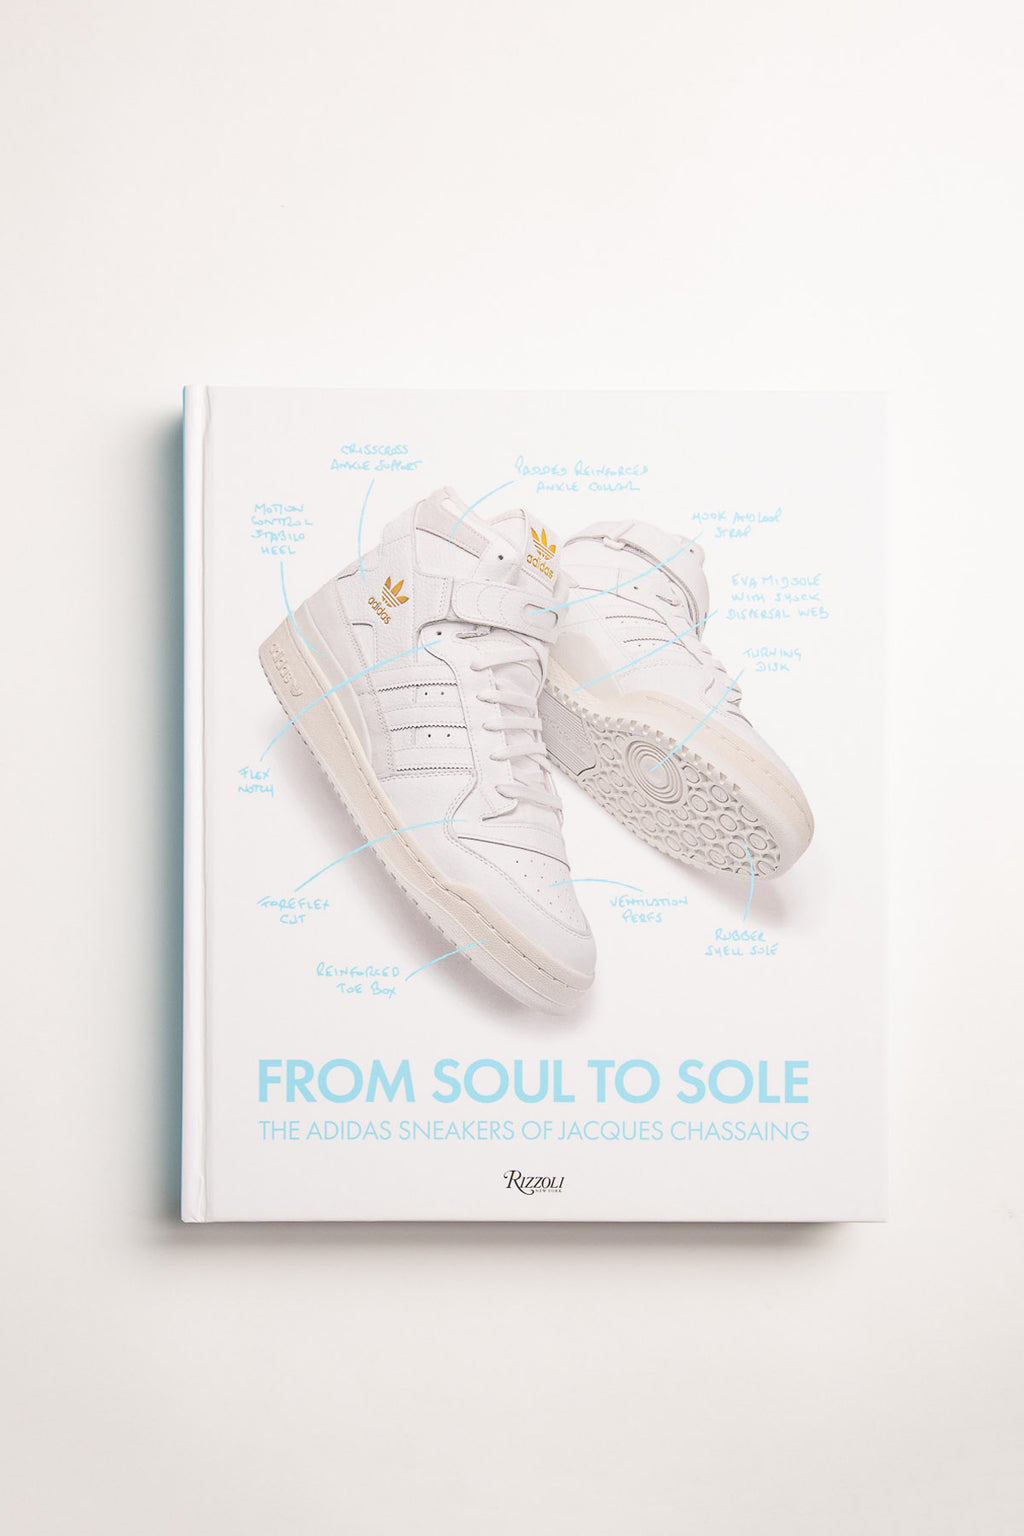 Book - From Soul to Sole, the Adidas sneakers of Jacques Chassaing